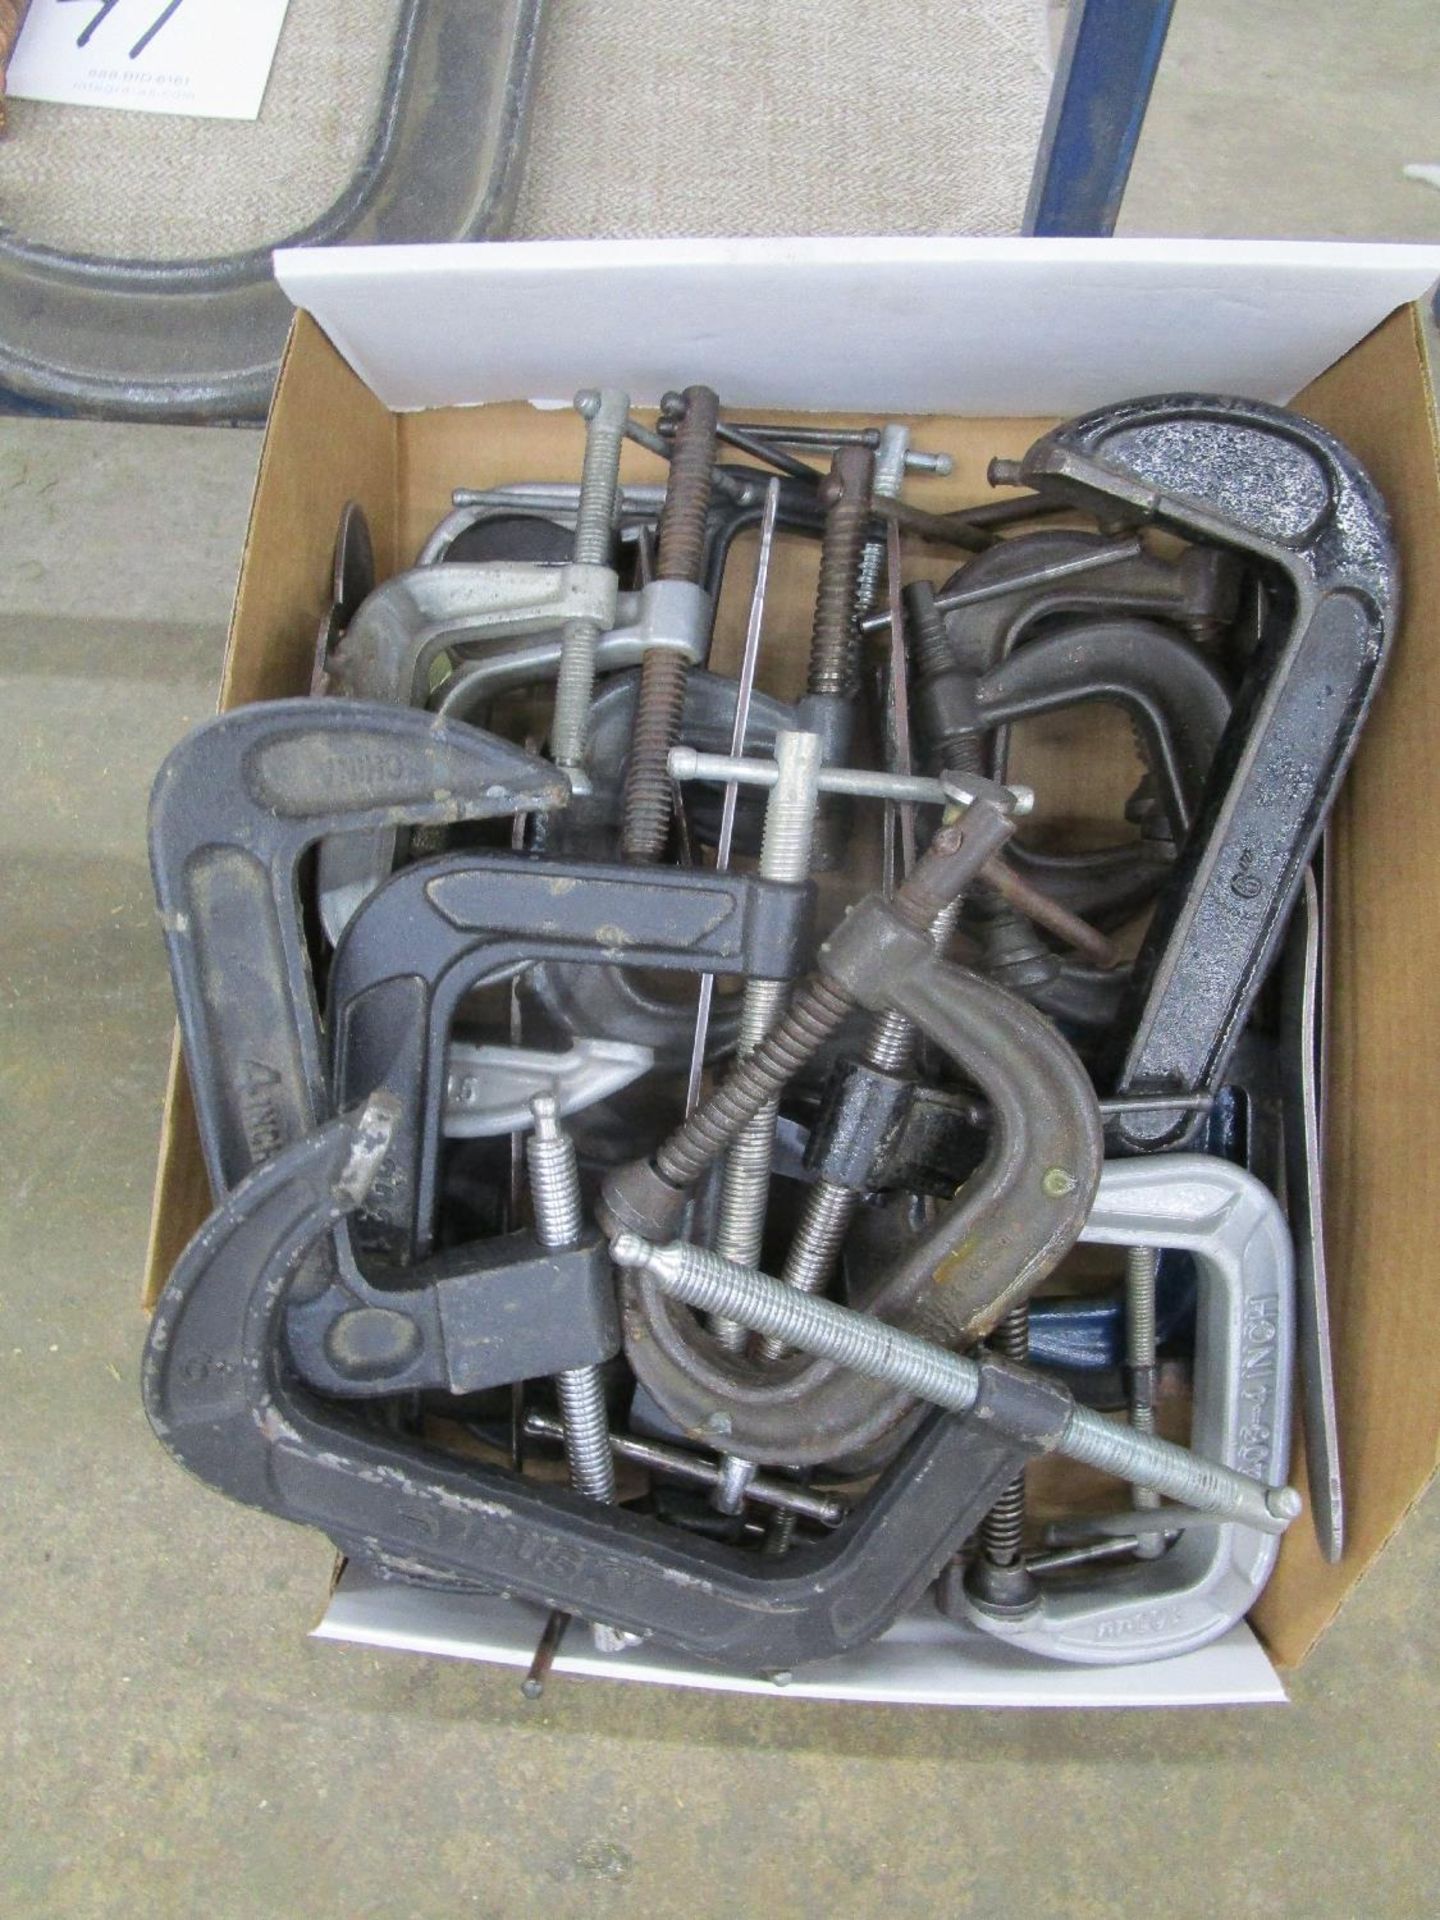 Lot of Assorted C-Clamps - Image 3 of 3